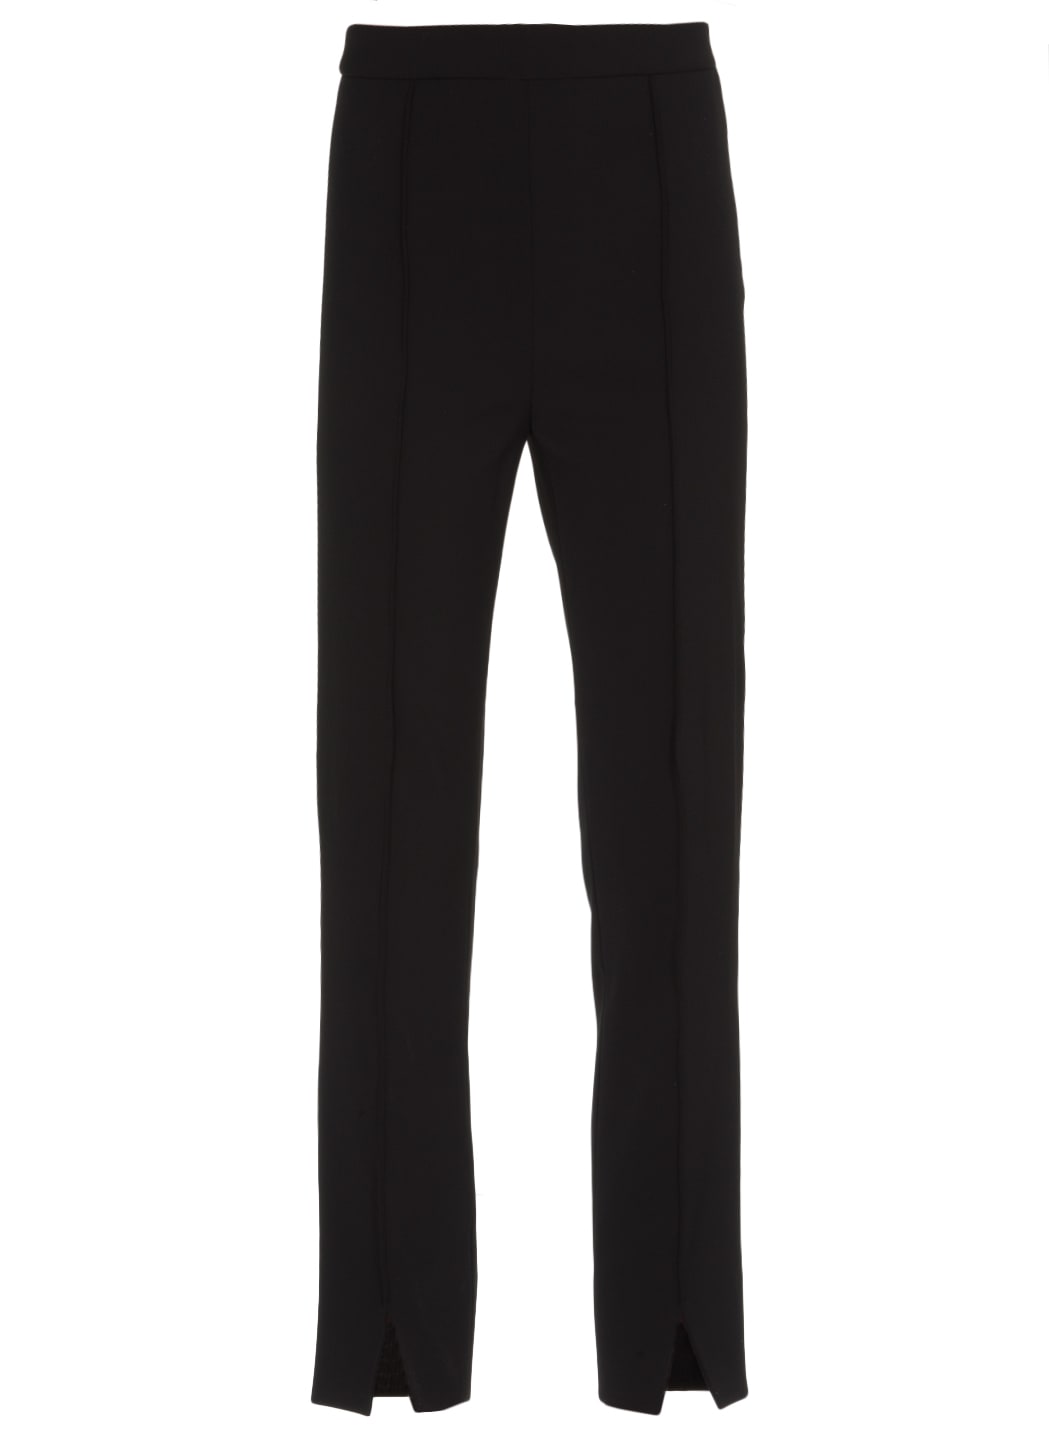 Boutique Moschino High Waist Trousers